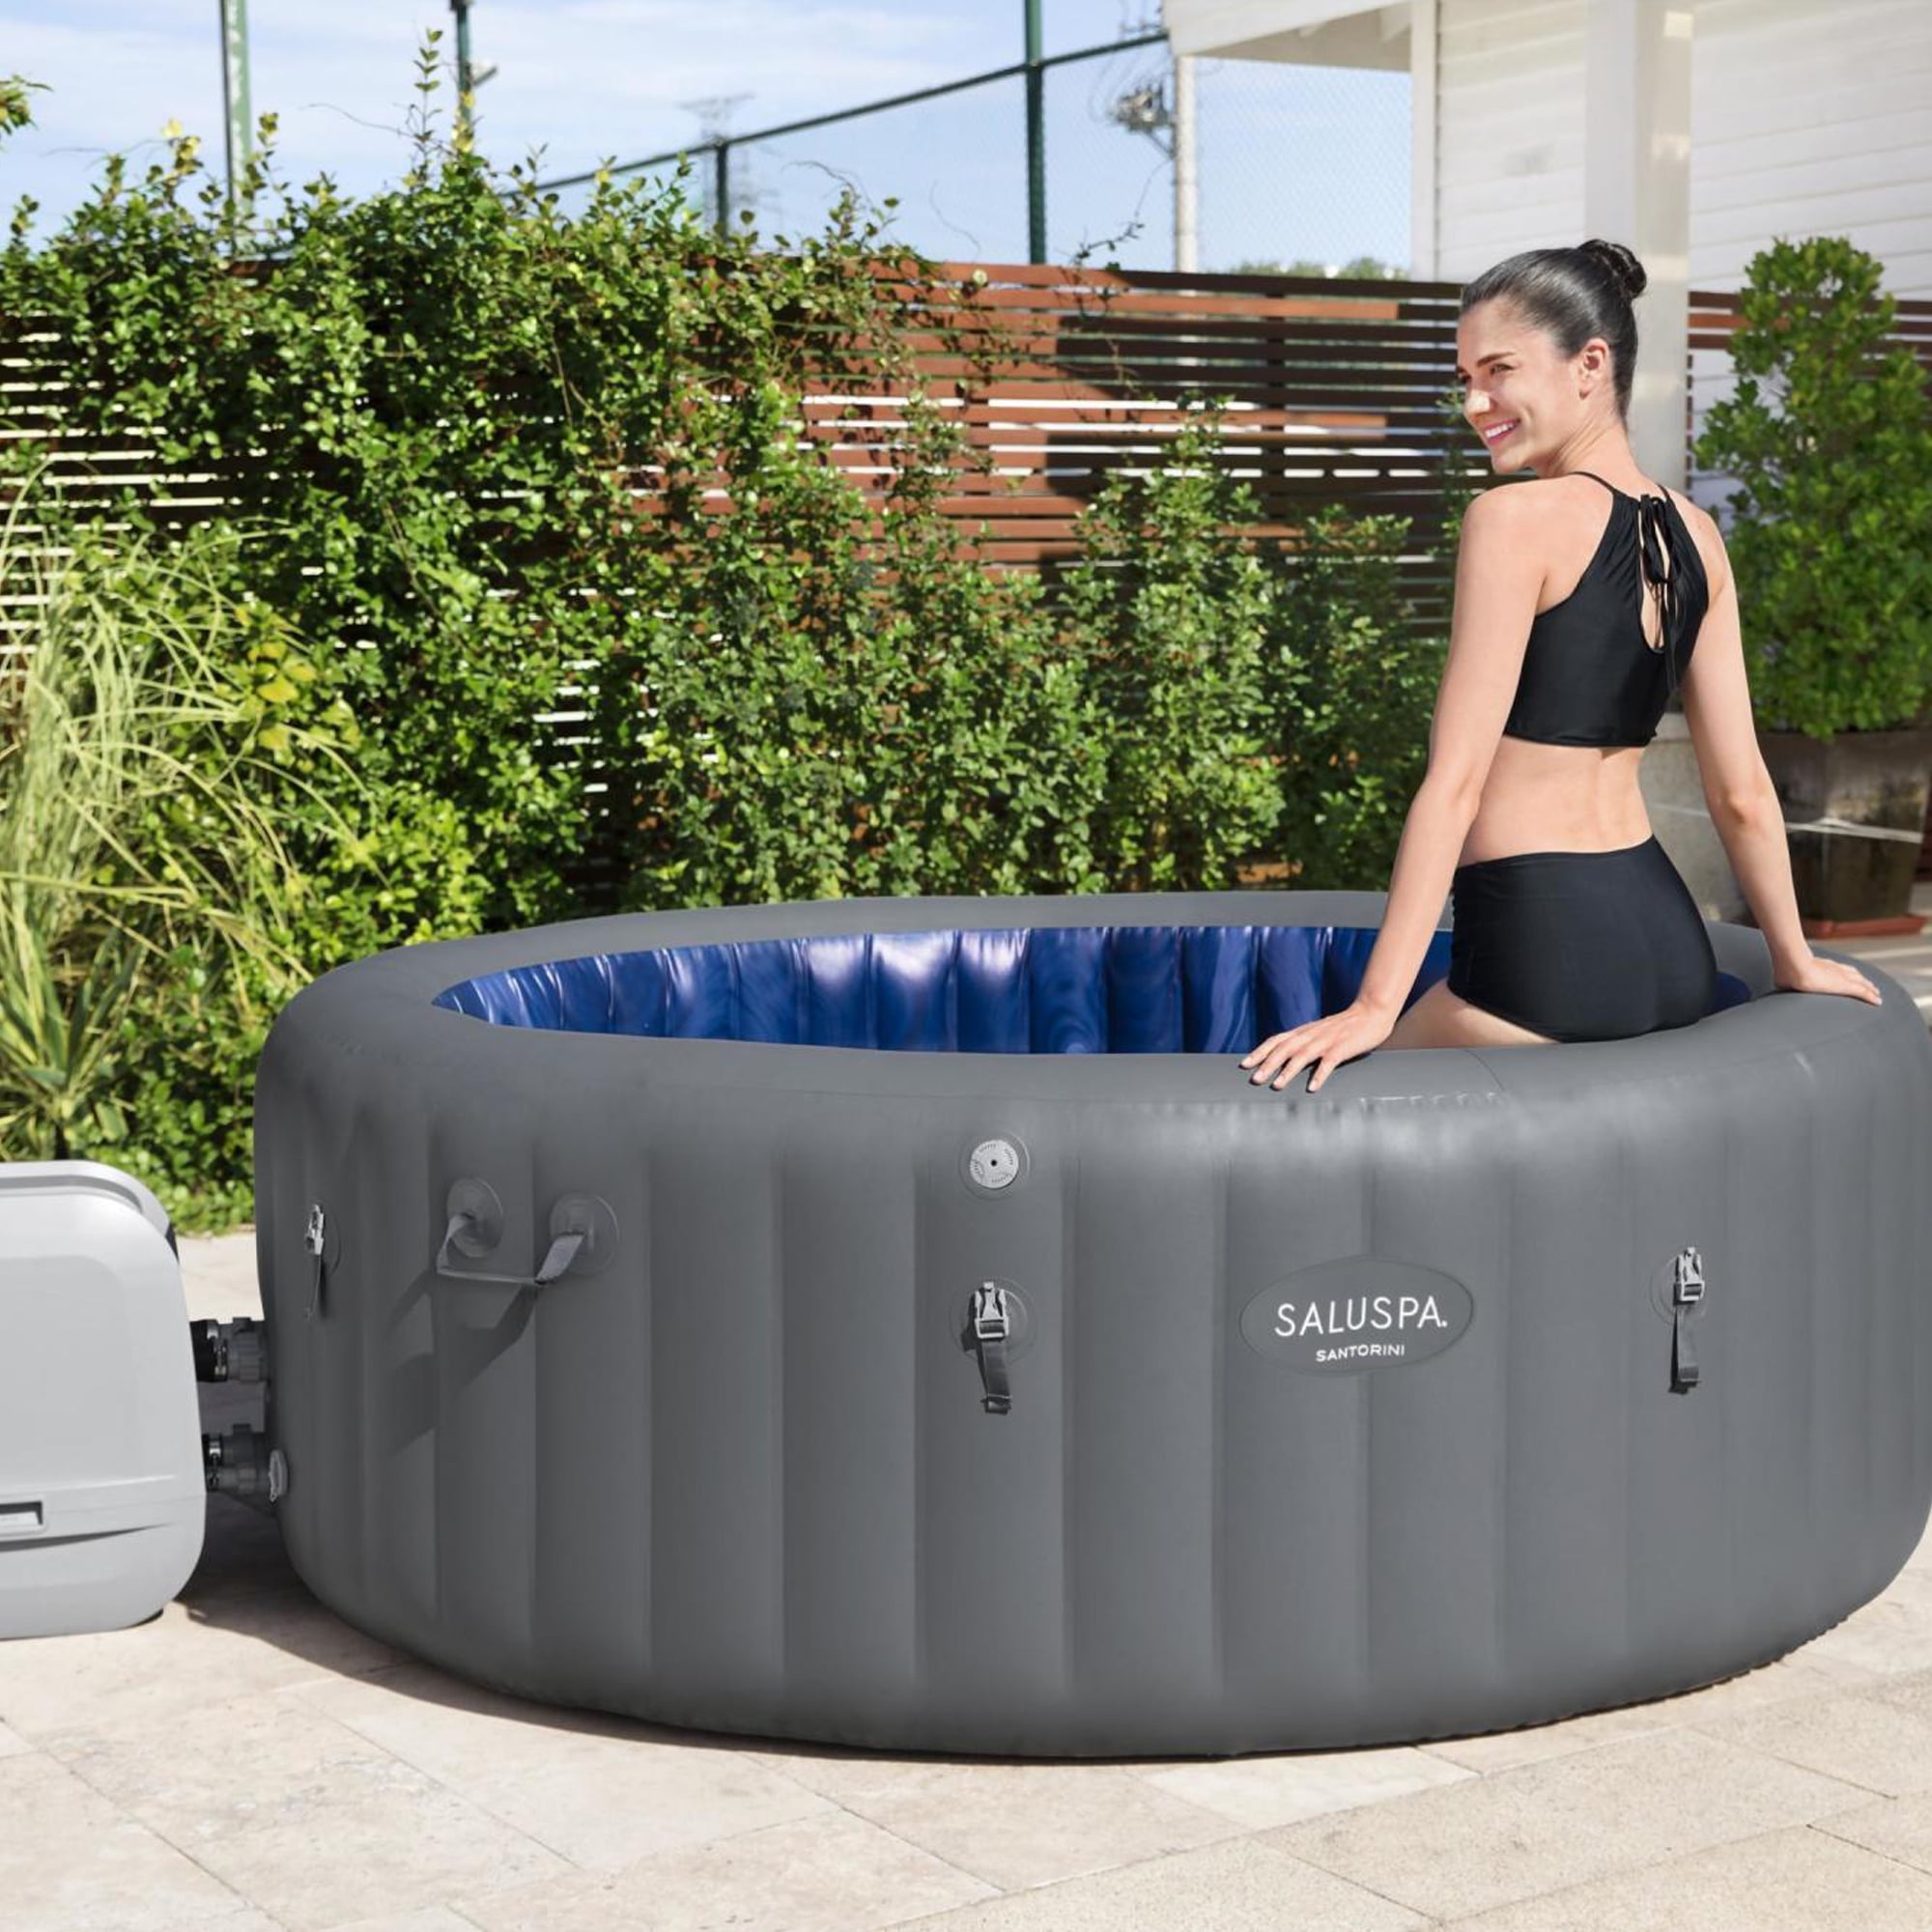 Tub Santorini with HydroJet Jets, Hot Bestway 180 Gray SaluSpa Inflatable